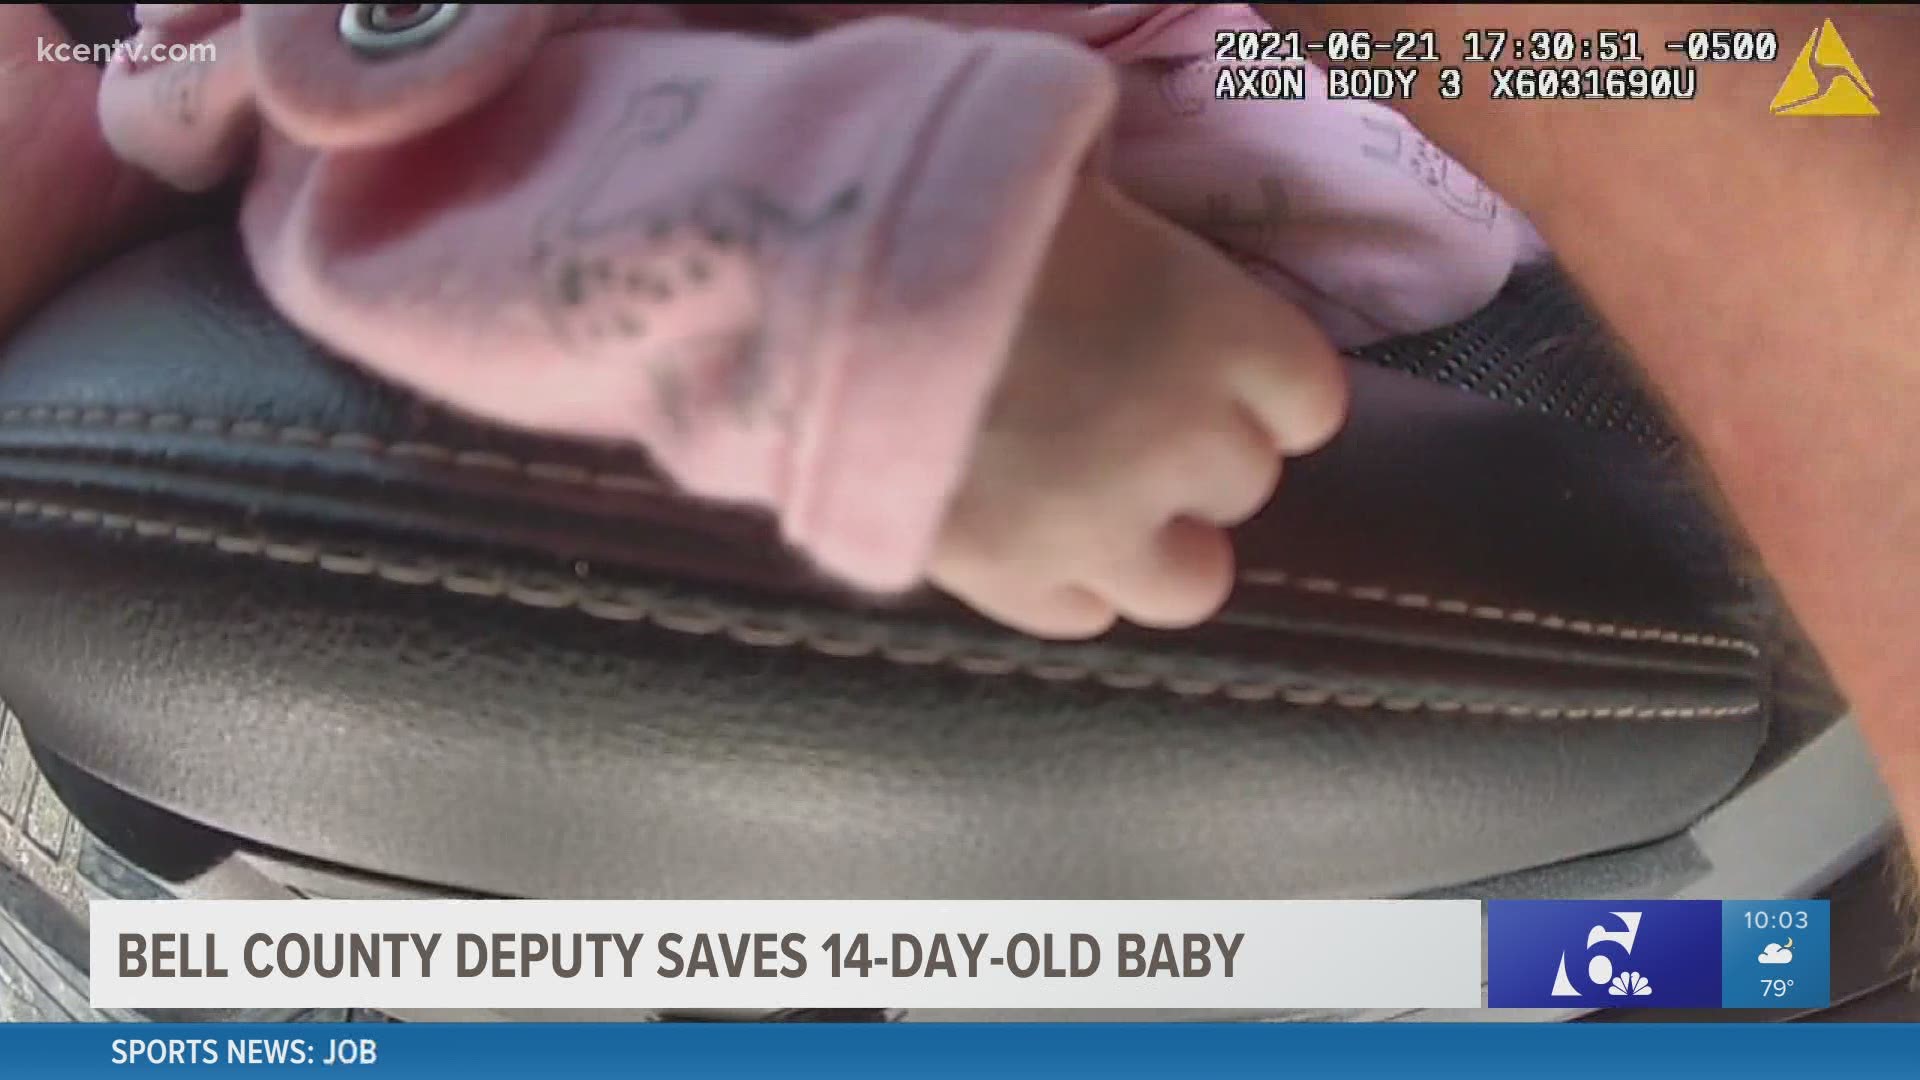 Deputy Shawn Hearn performed CPR on the 14-day-old baby until EMS arrived.